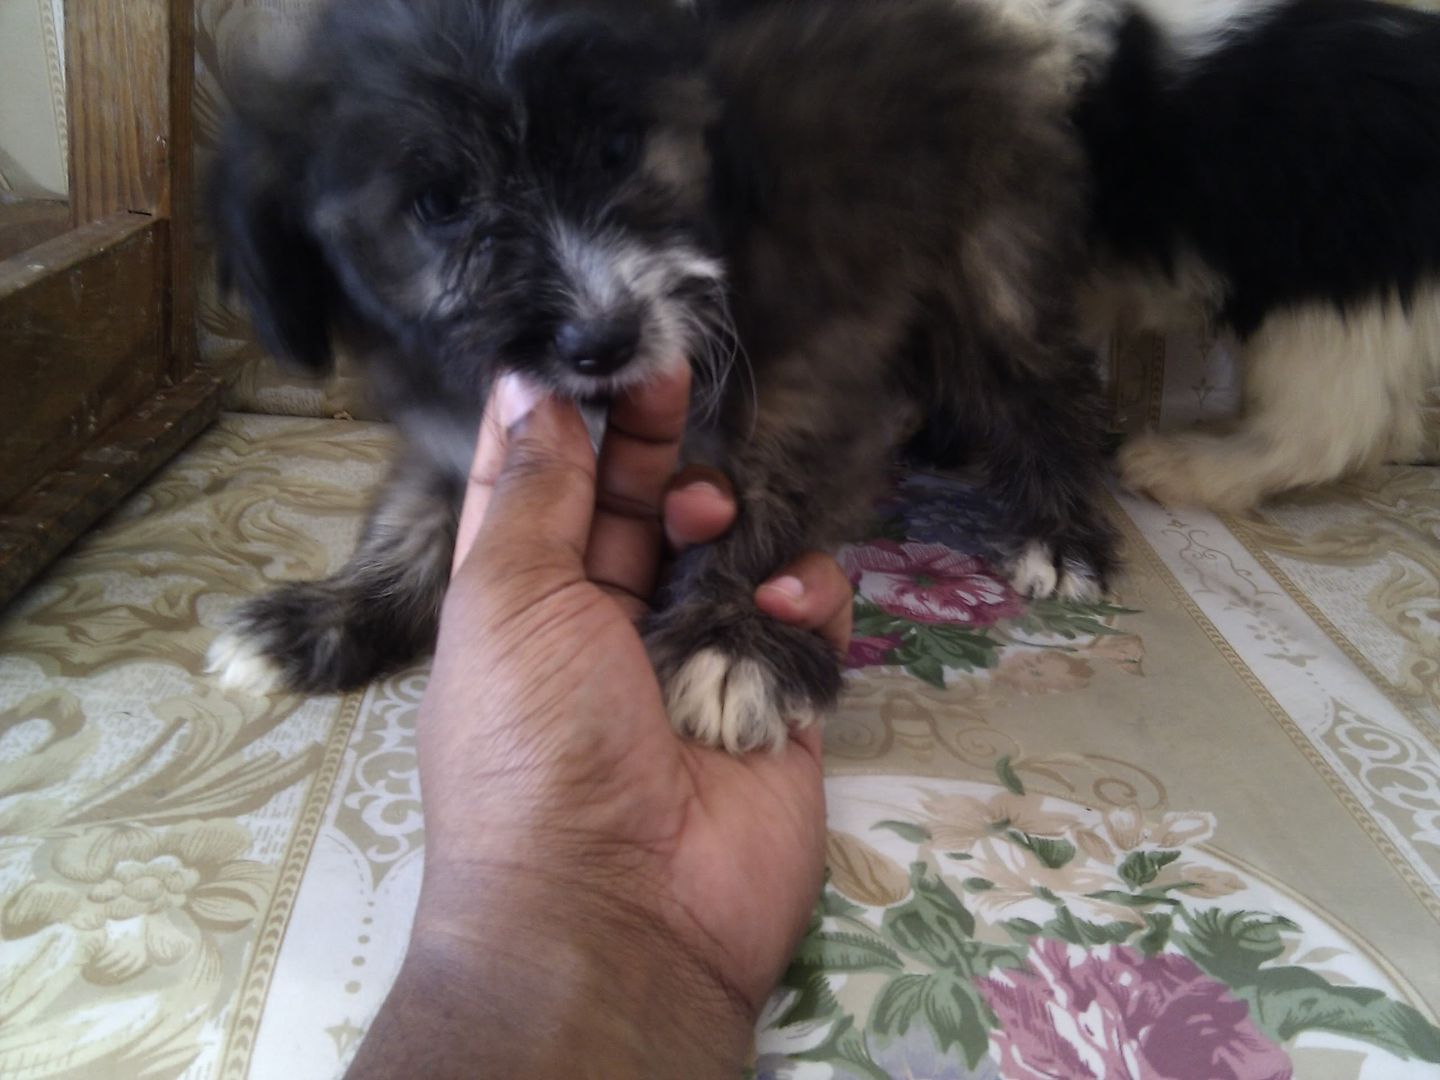 Shih+tzu+poodle+mix+puppies+for+sale+uk